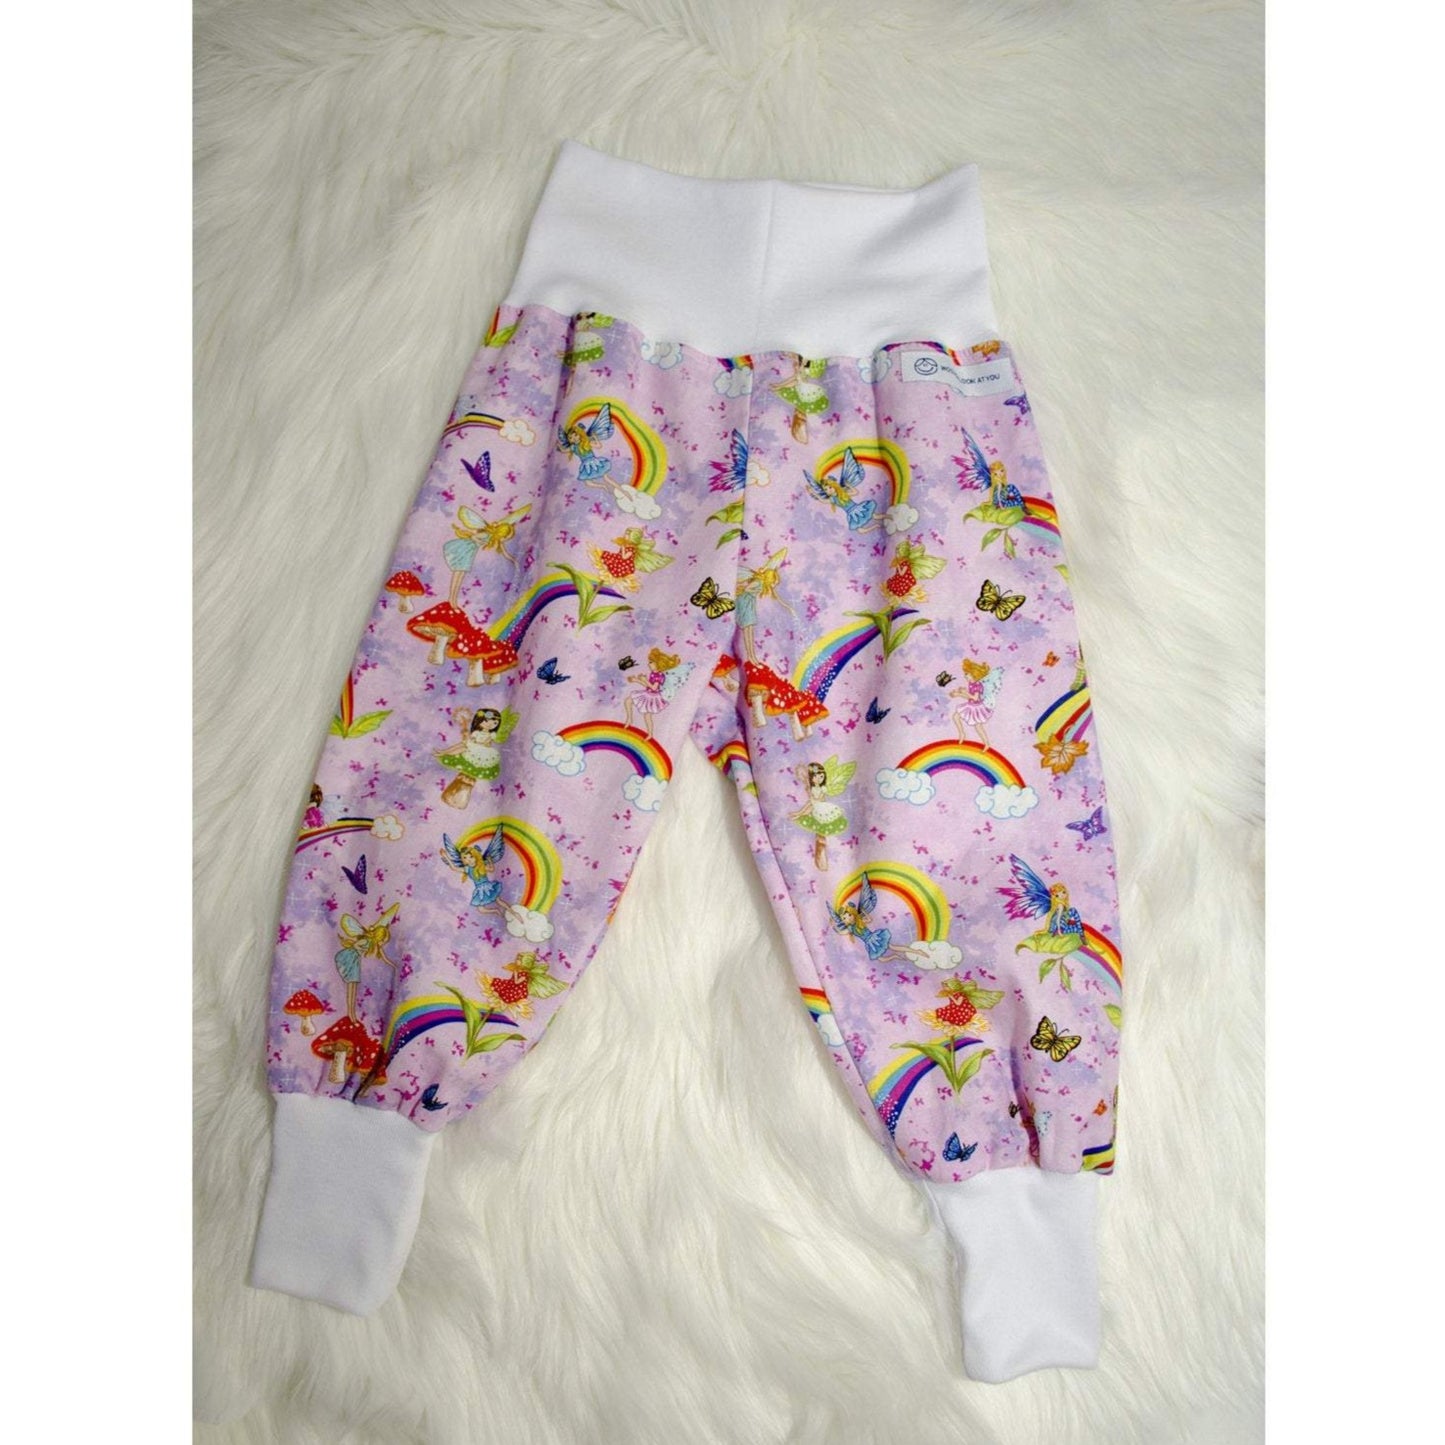 Pants - Harem - Ribbed Waist -  Pink Fairies & Rainbows with White Bands